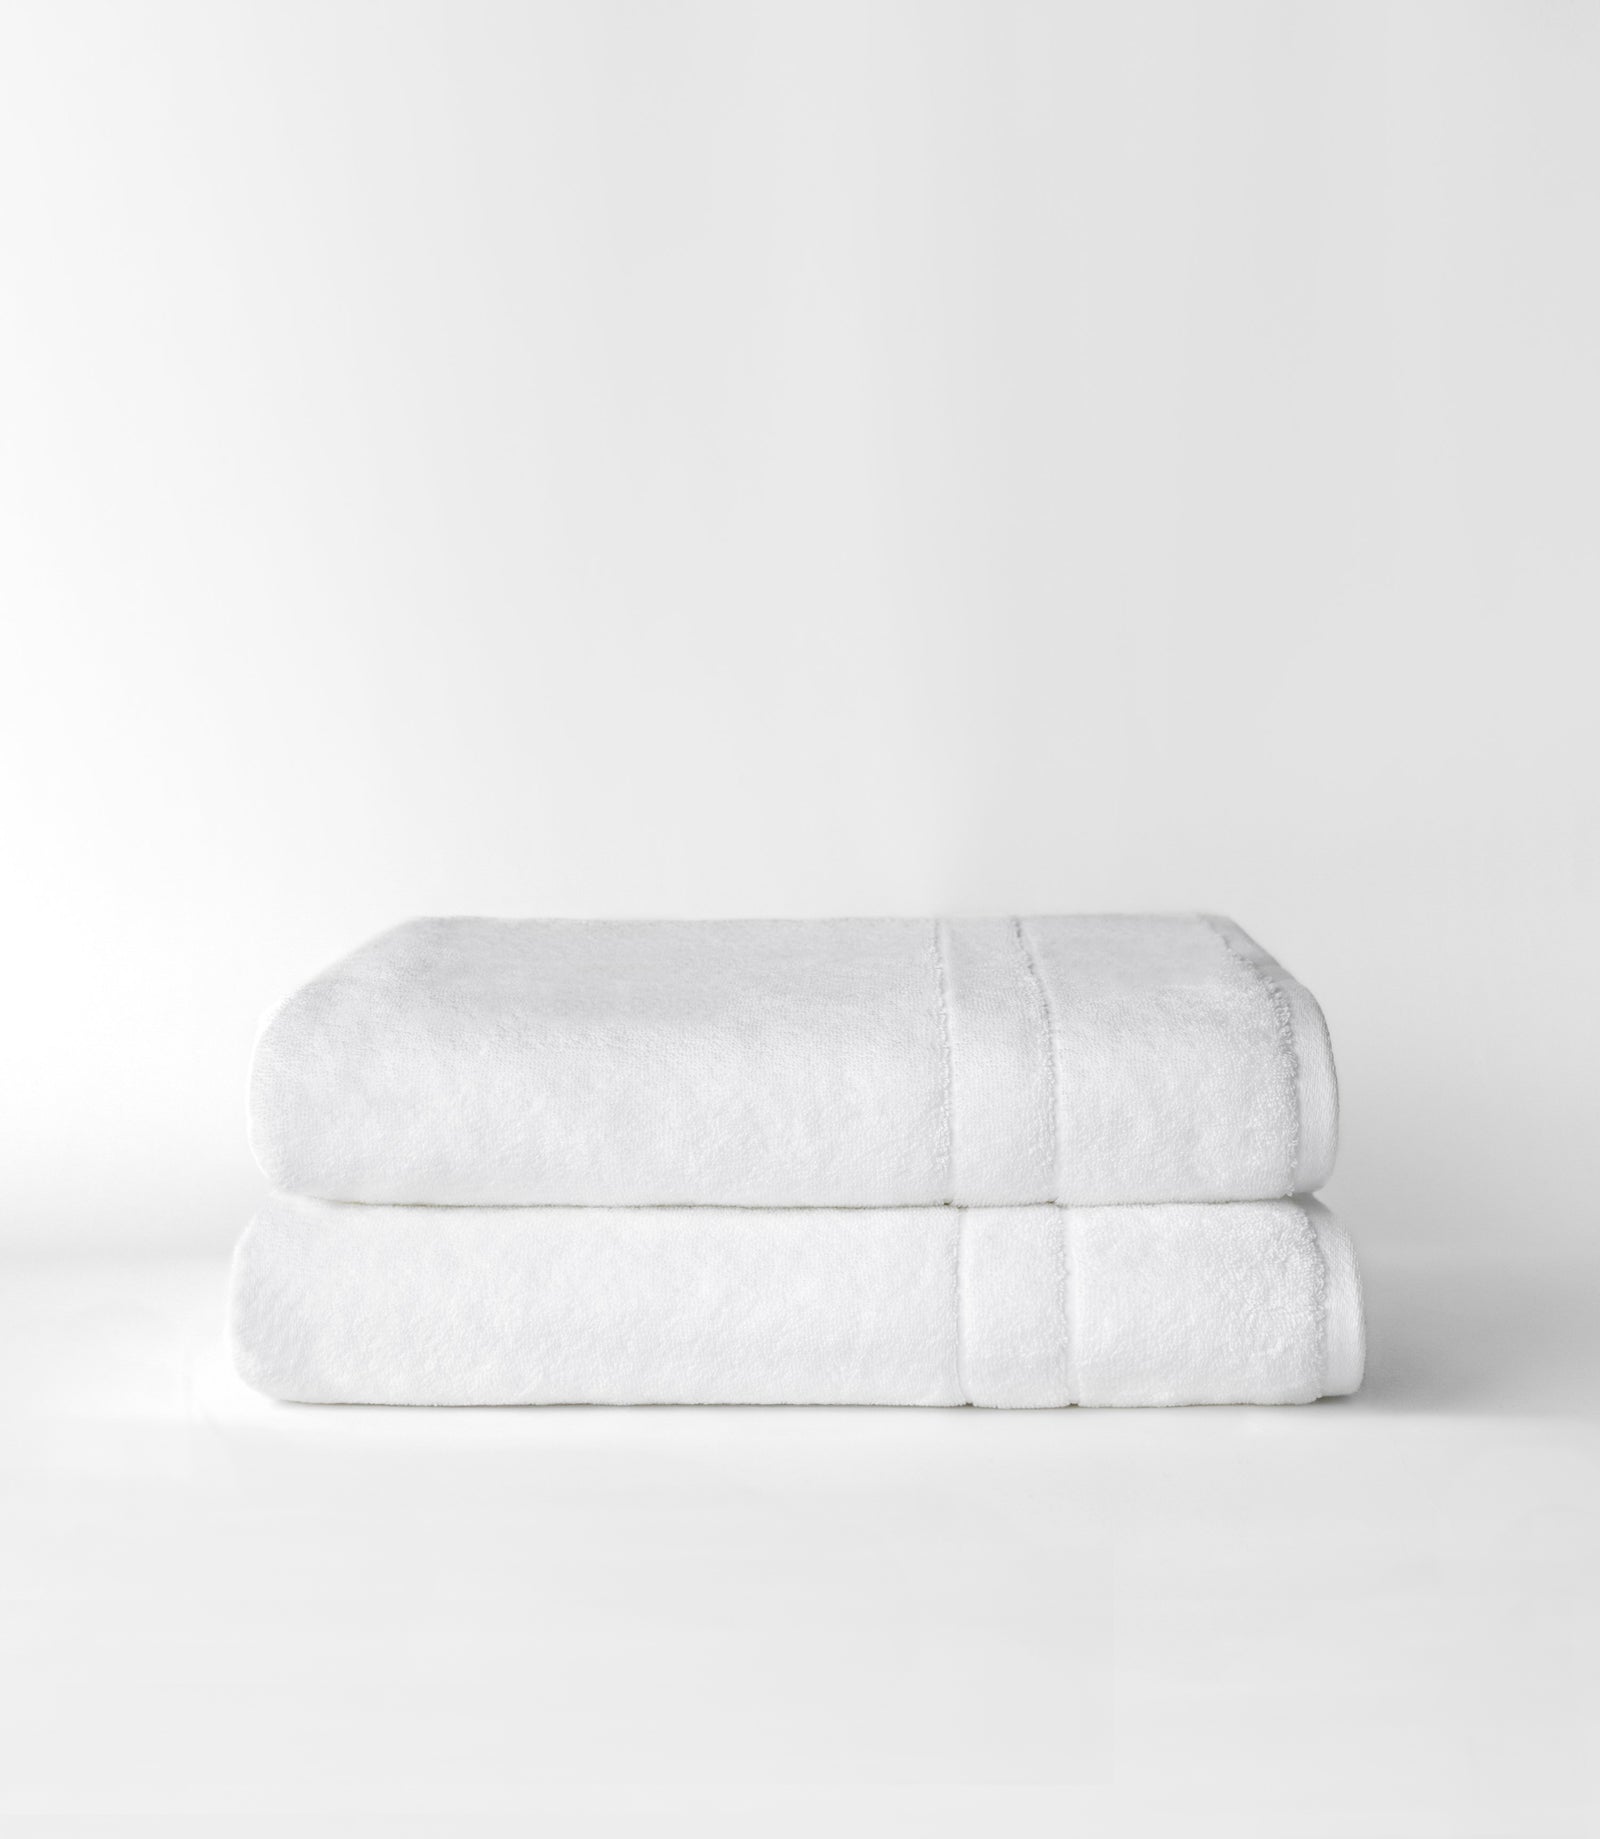 Premium Plush Bath Sheets in the color white. Photo of bath sheets taken with white background 